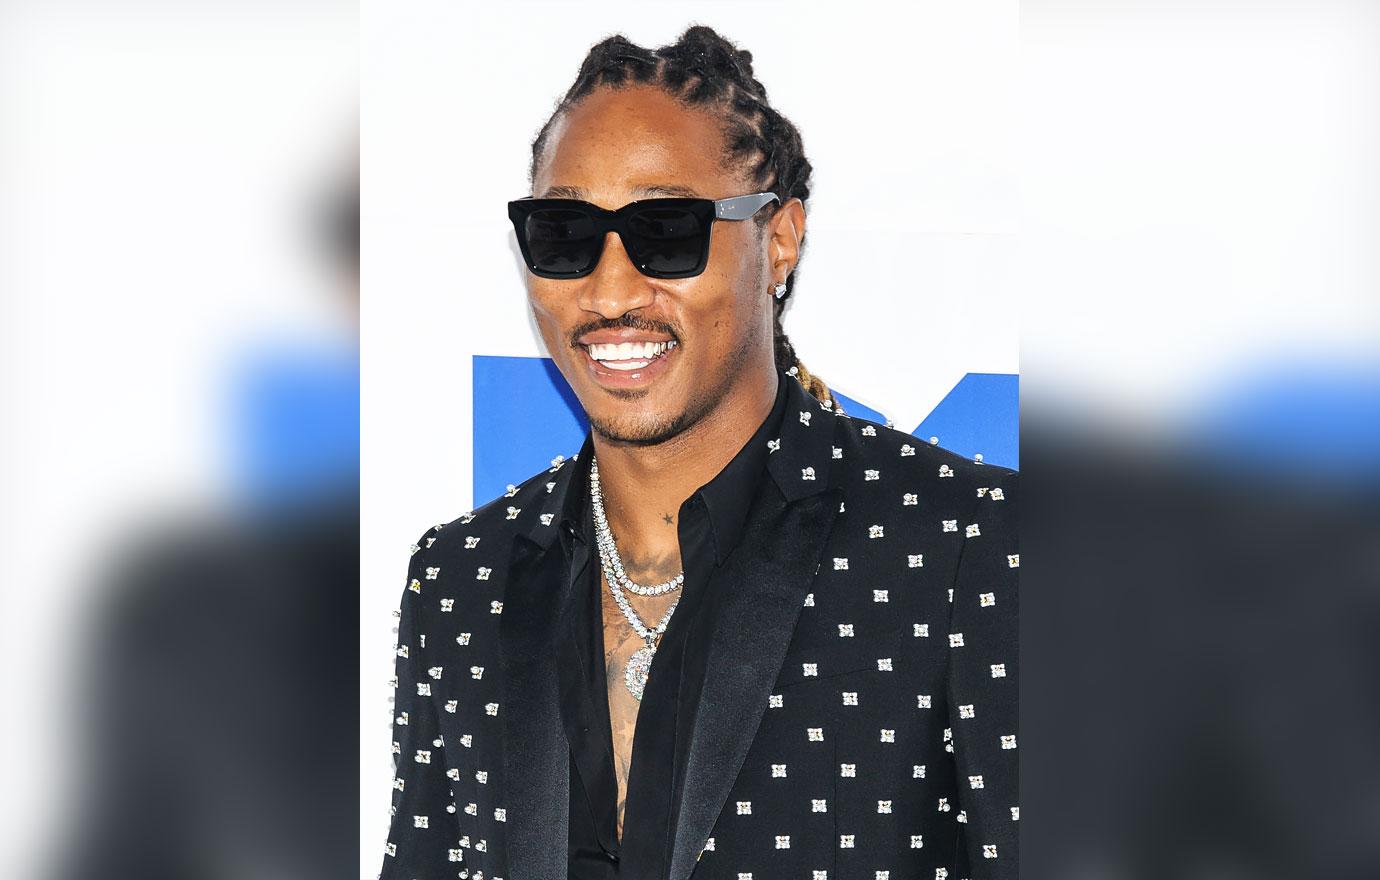 Future's Baby Mama Joie Chavis Denies Sleeping With Diddy On Yacht